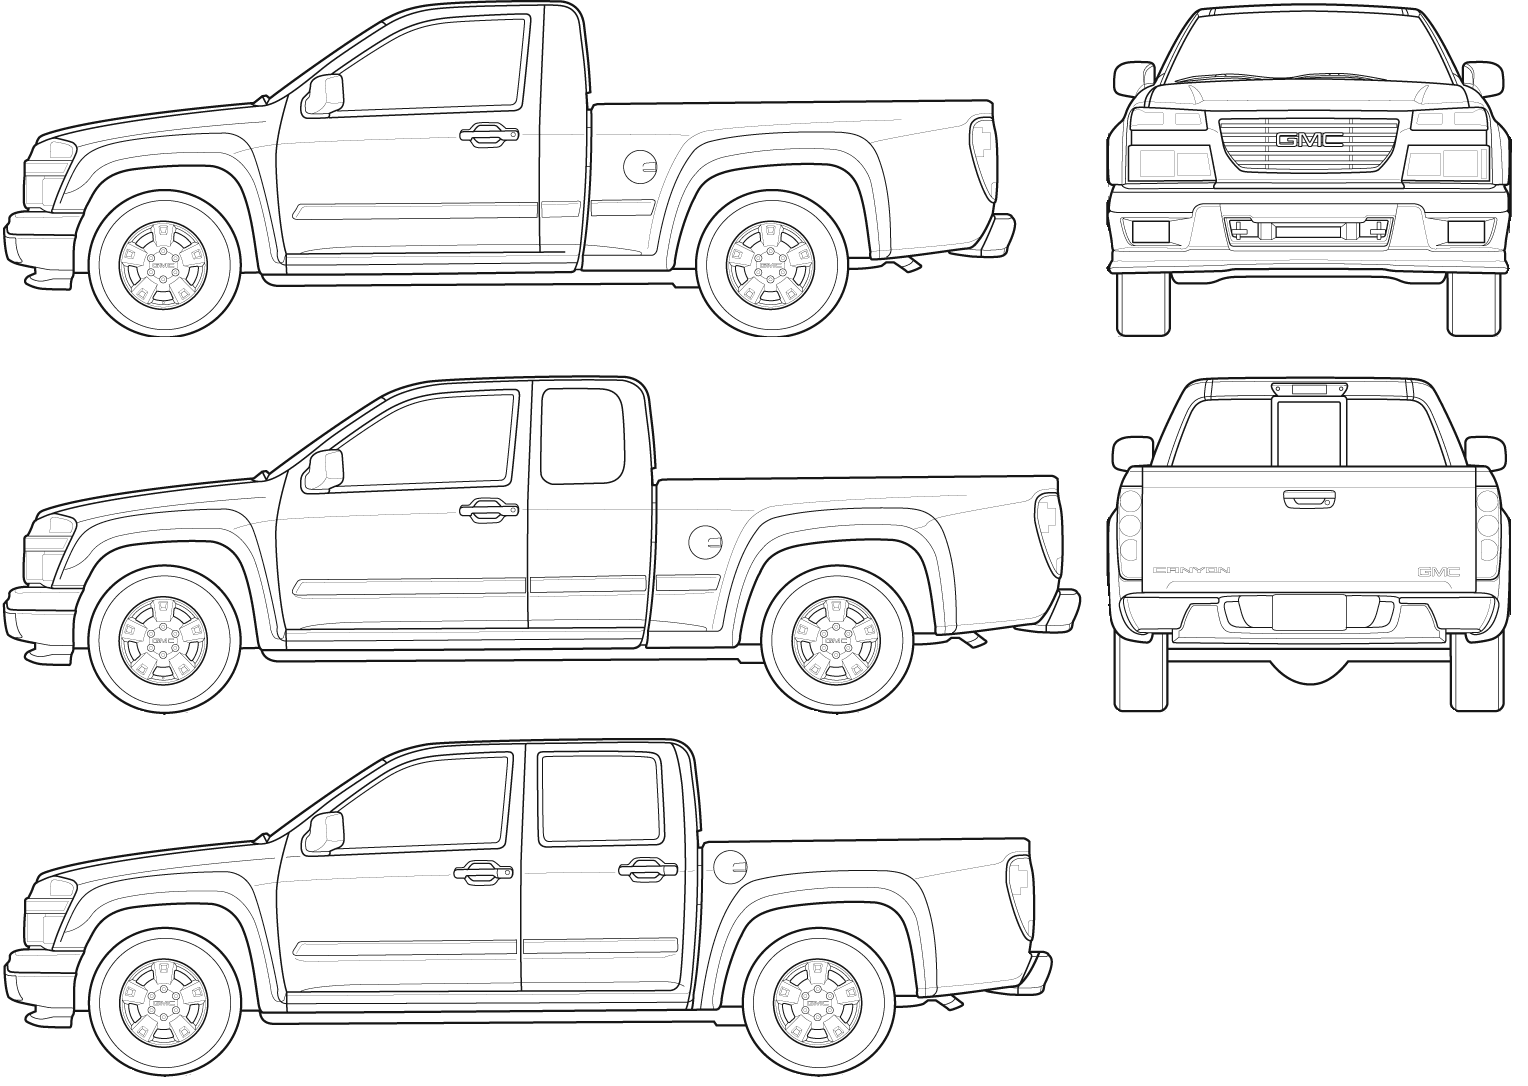 2007 GMC Canyon Pickup Truck blueprints free - Outlines.